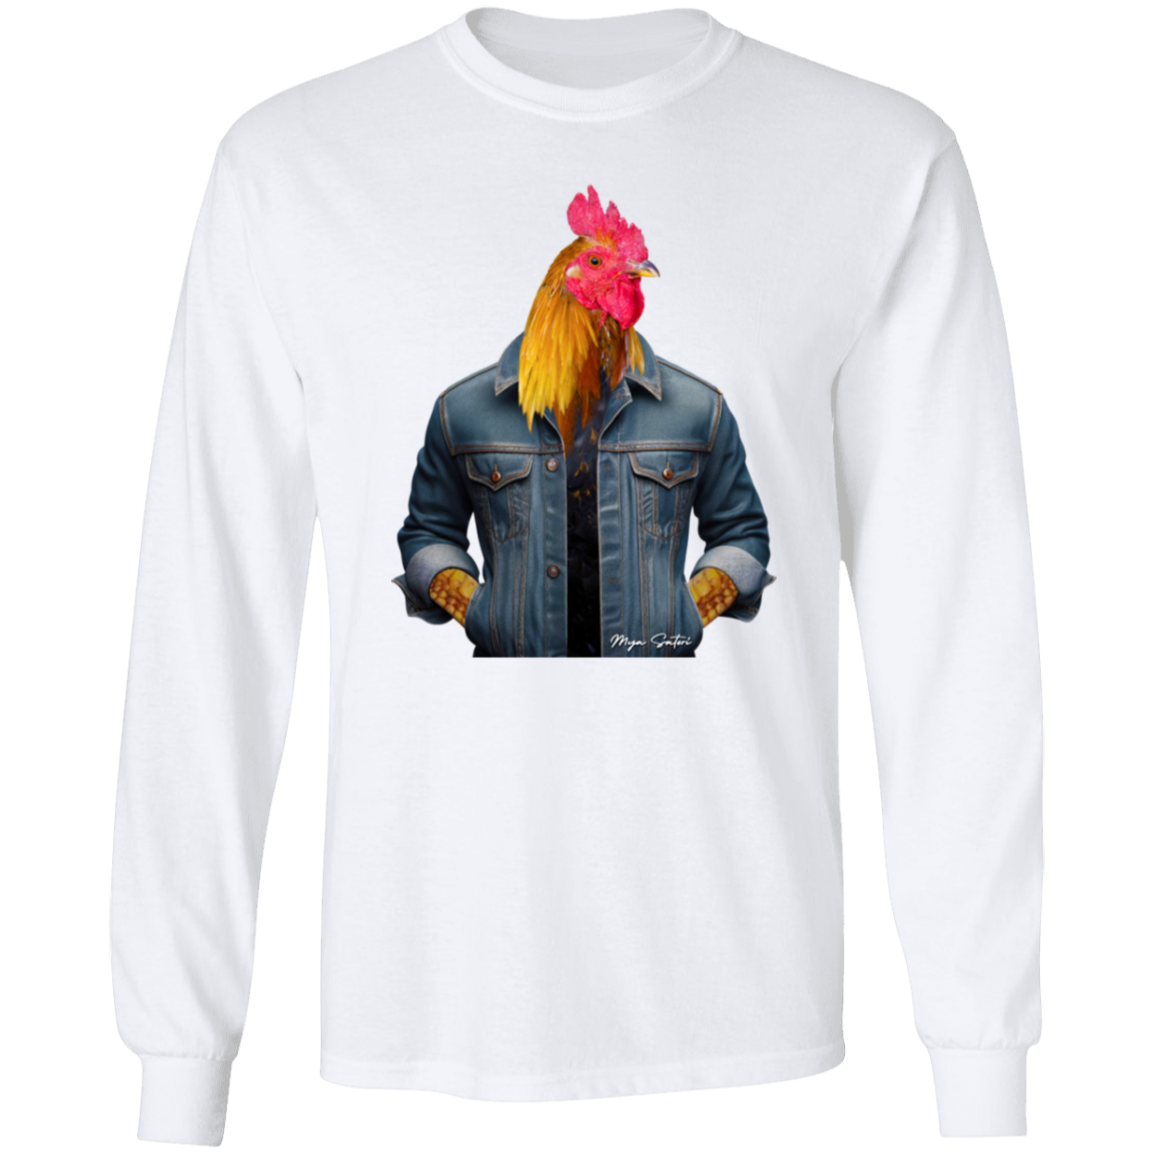 Rooster | Men's Ultra Cotton T-Shirts - Long Sleeve